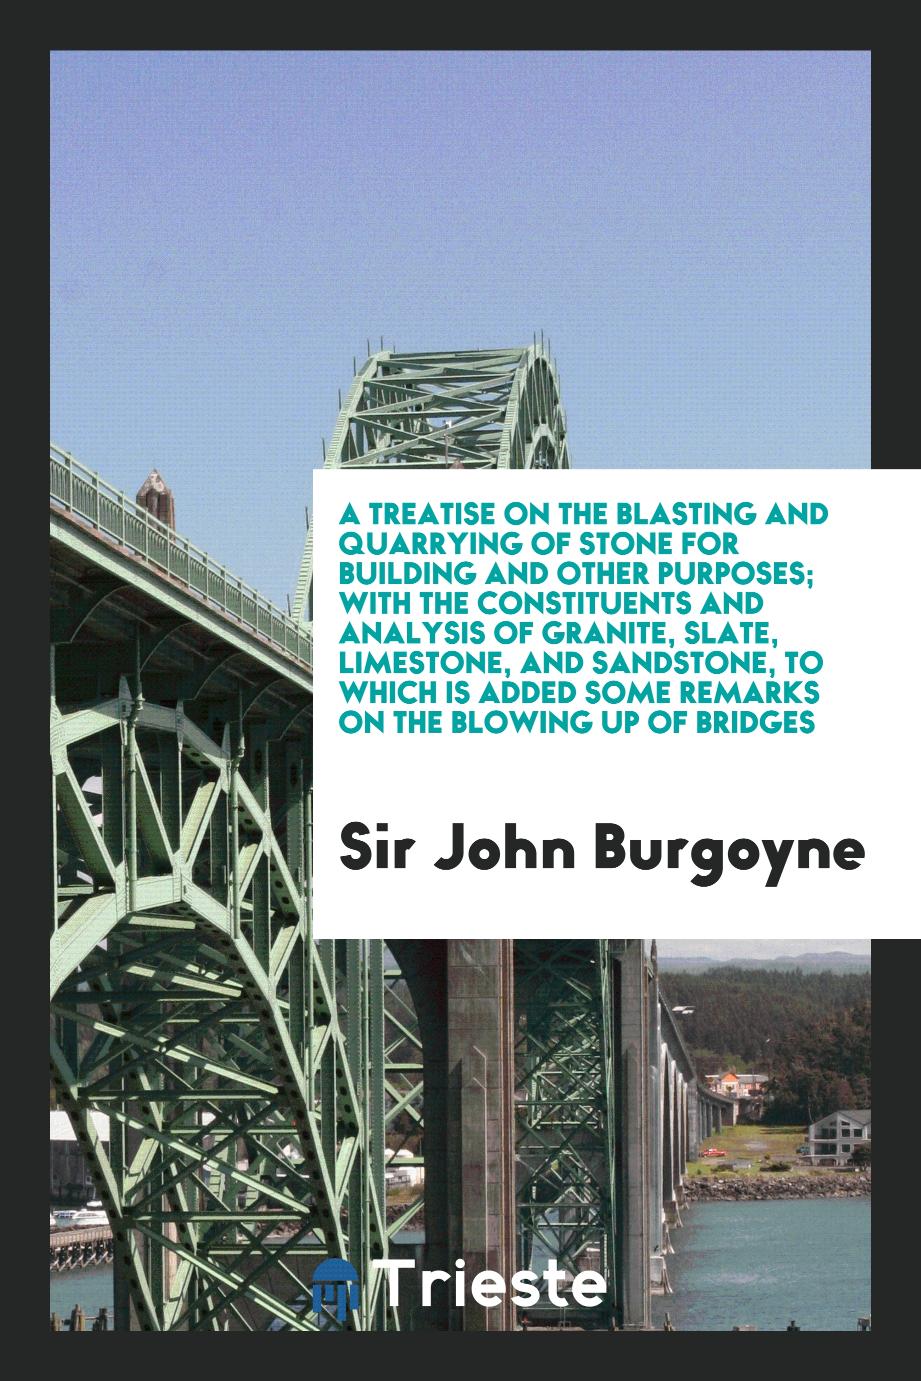 A Treatise on the Blasting and Quarrying of Stone for Building and Other Purposes; With the Constituents and Analysis of Granite, Slate, Limestone, and Sandstone, to Which Is Added Some Remarks on the Blowing up of Bridges